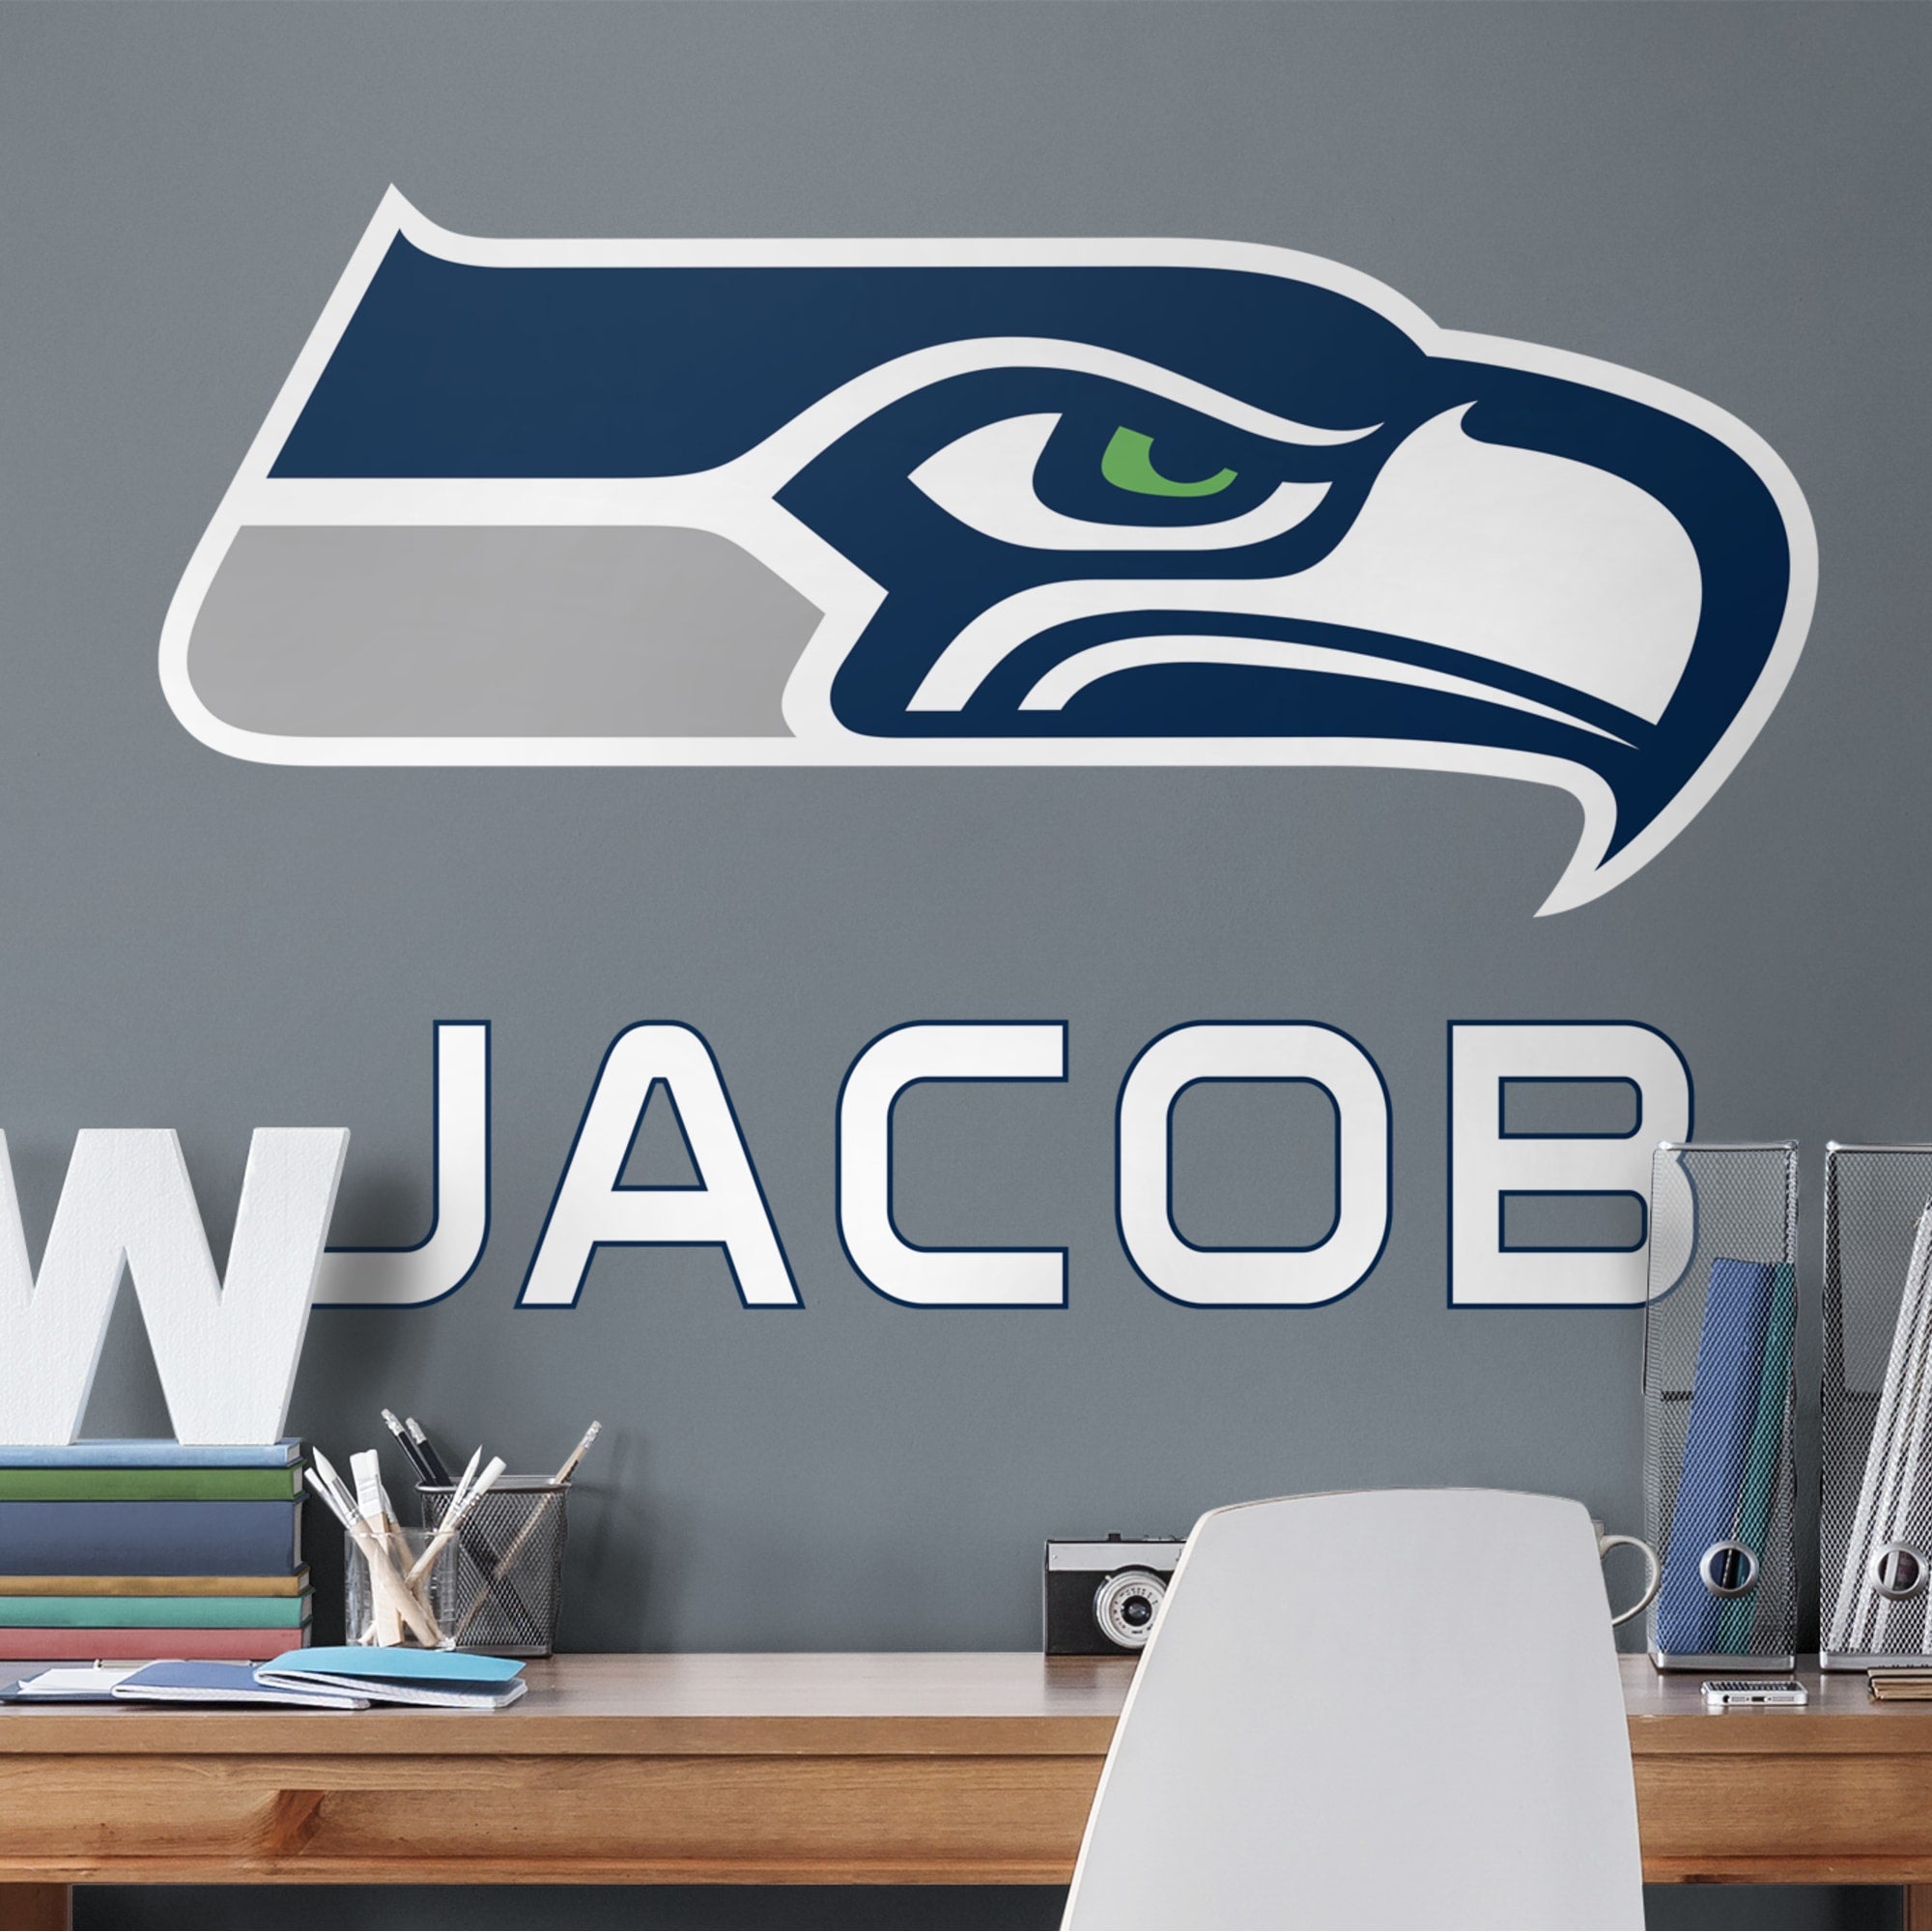 Seattle Seahawks: Stacked Personalized Name - Officially Licensed NFL Transfer Decal in White (52"W x 39.5"H) by Fathead | Vinyl